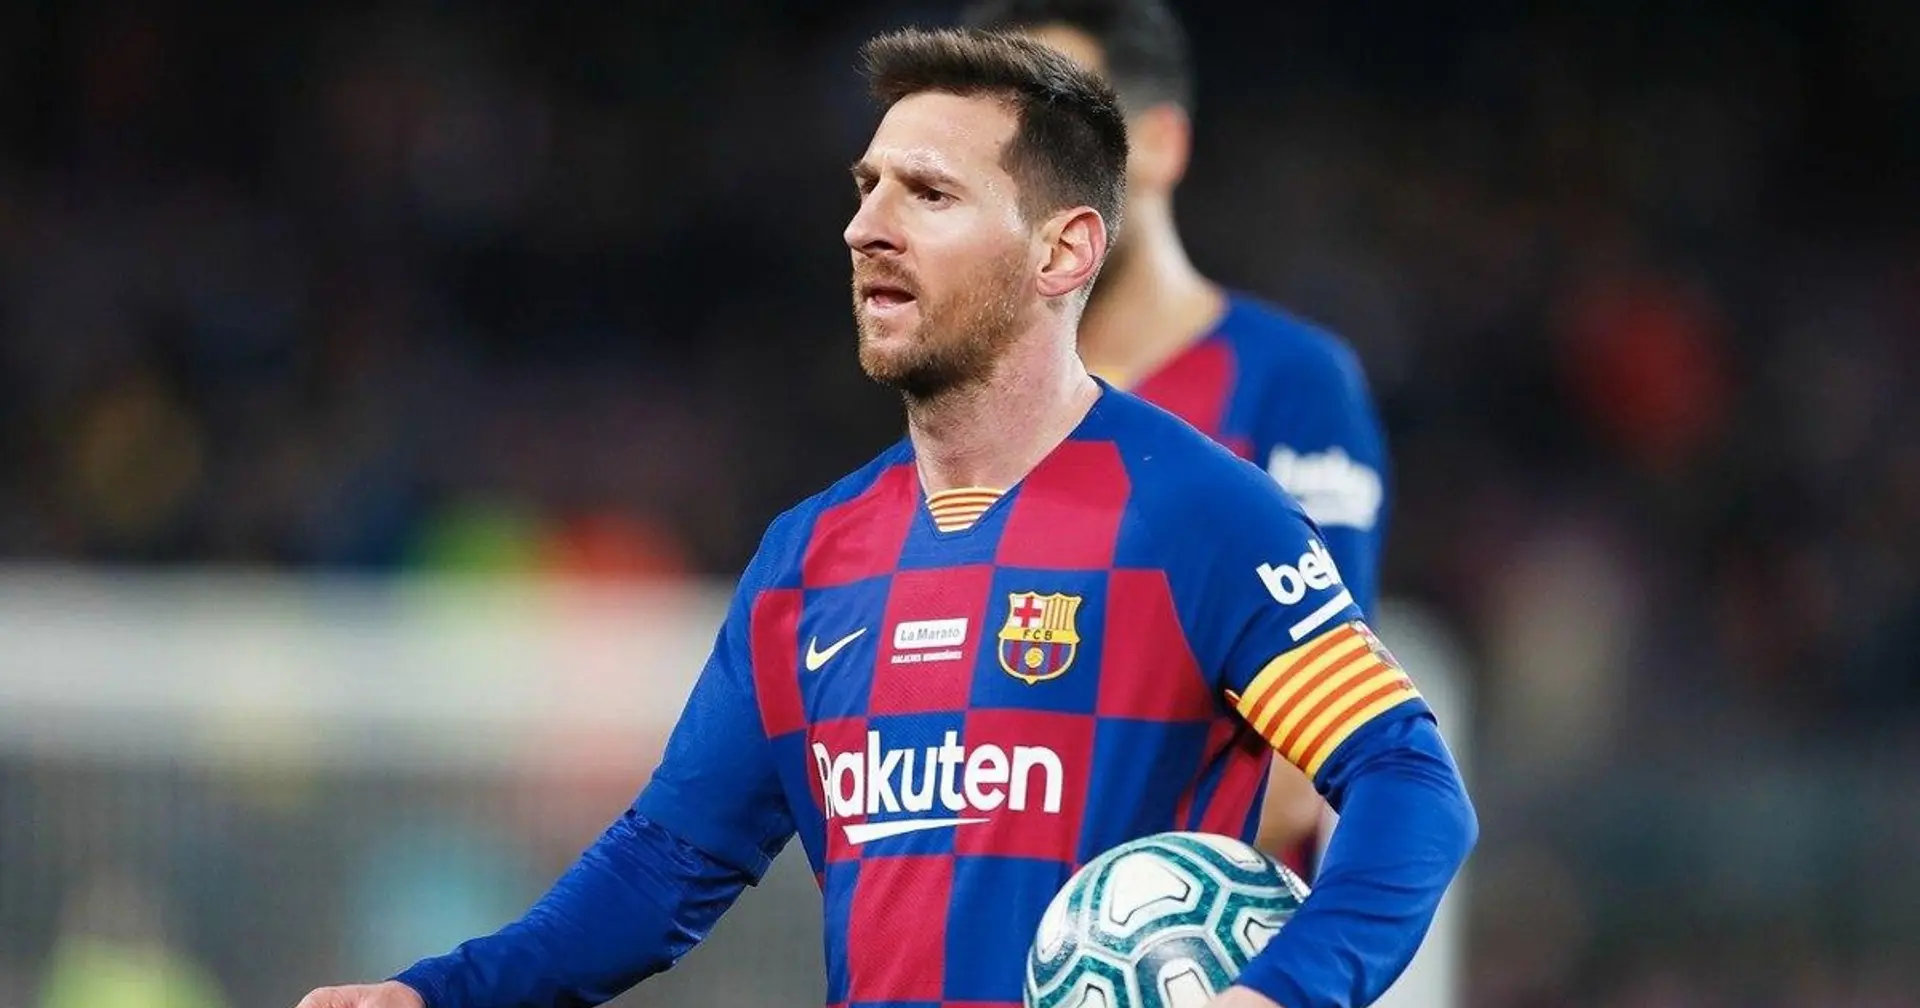 Leo Messi in race to win prize for most nutmegs in 2019/20 season